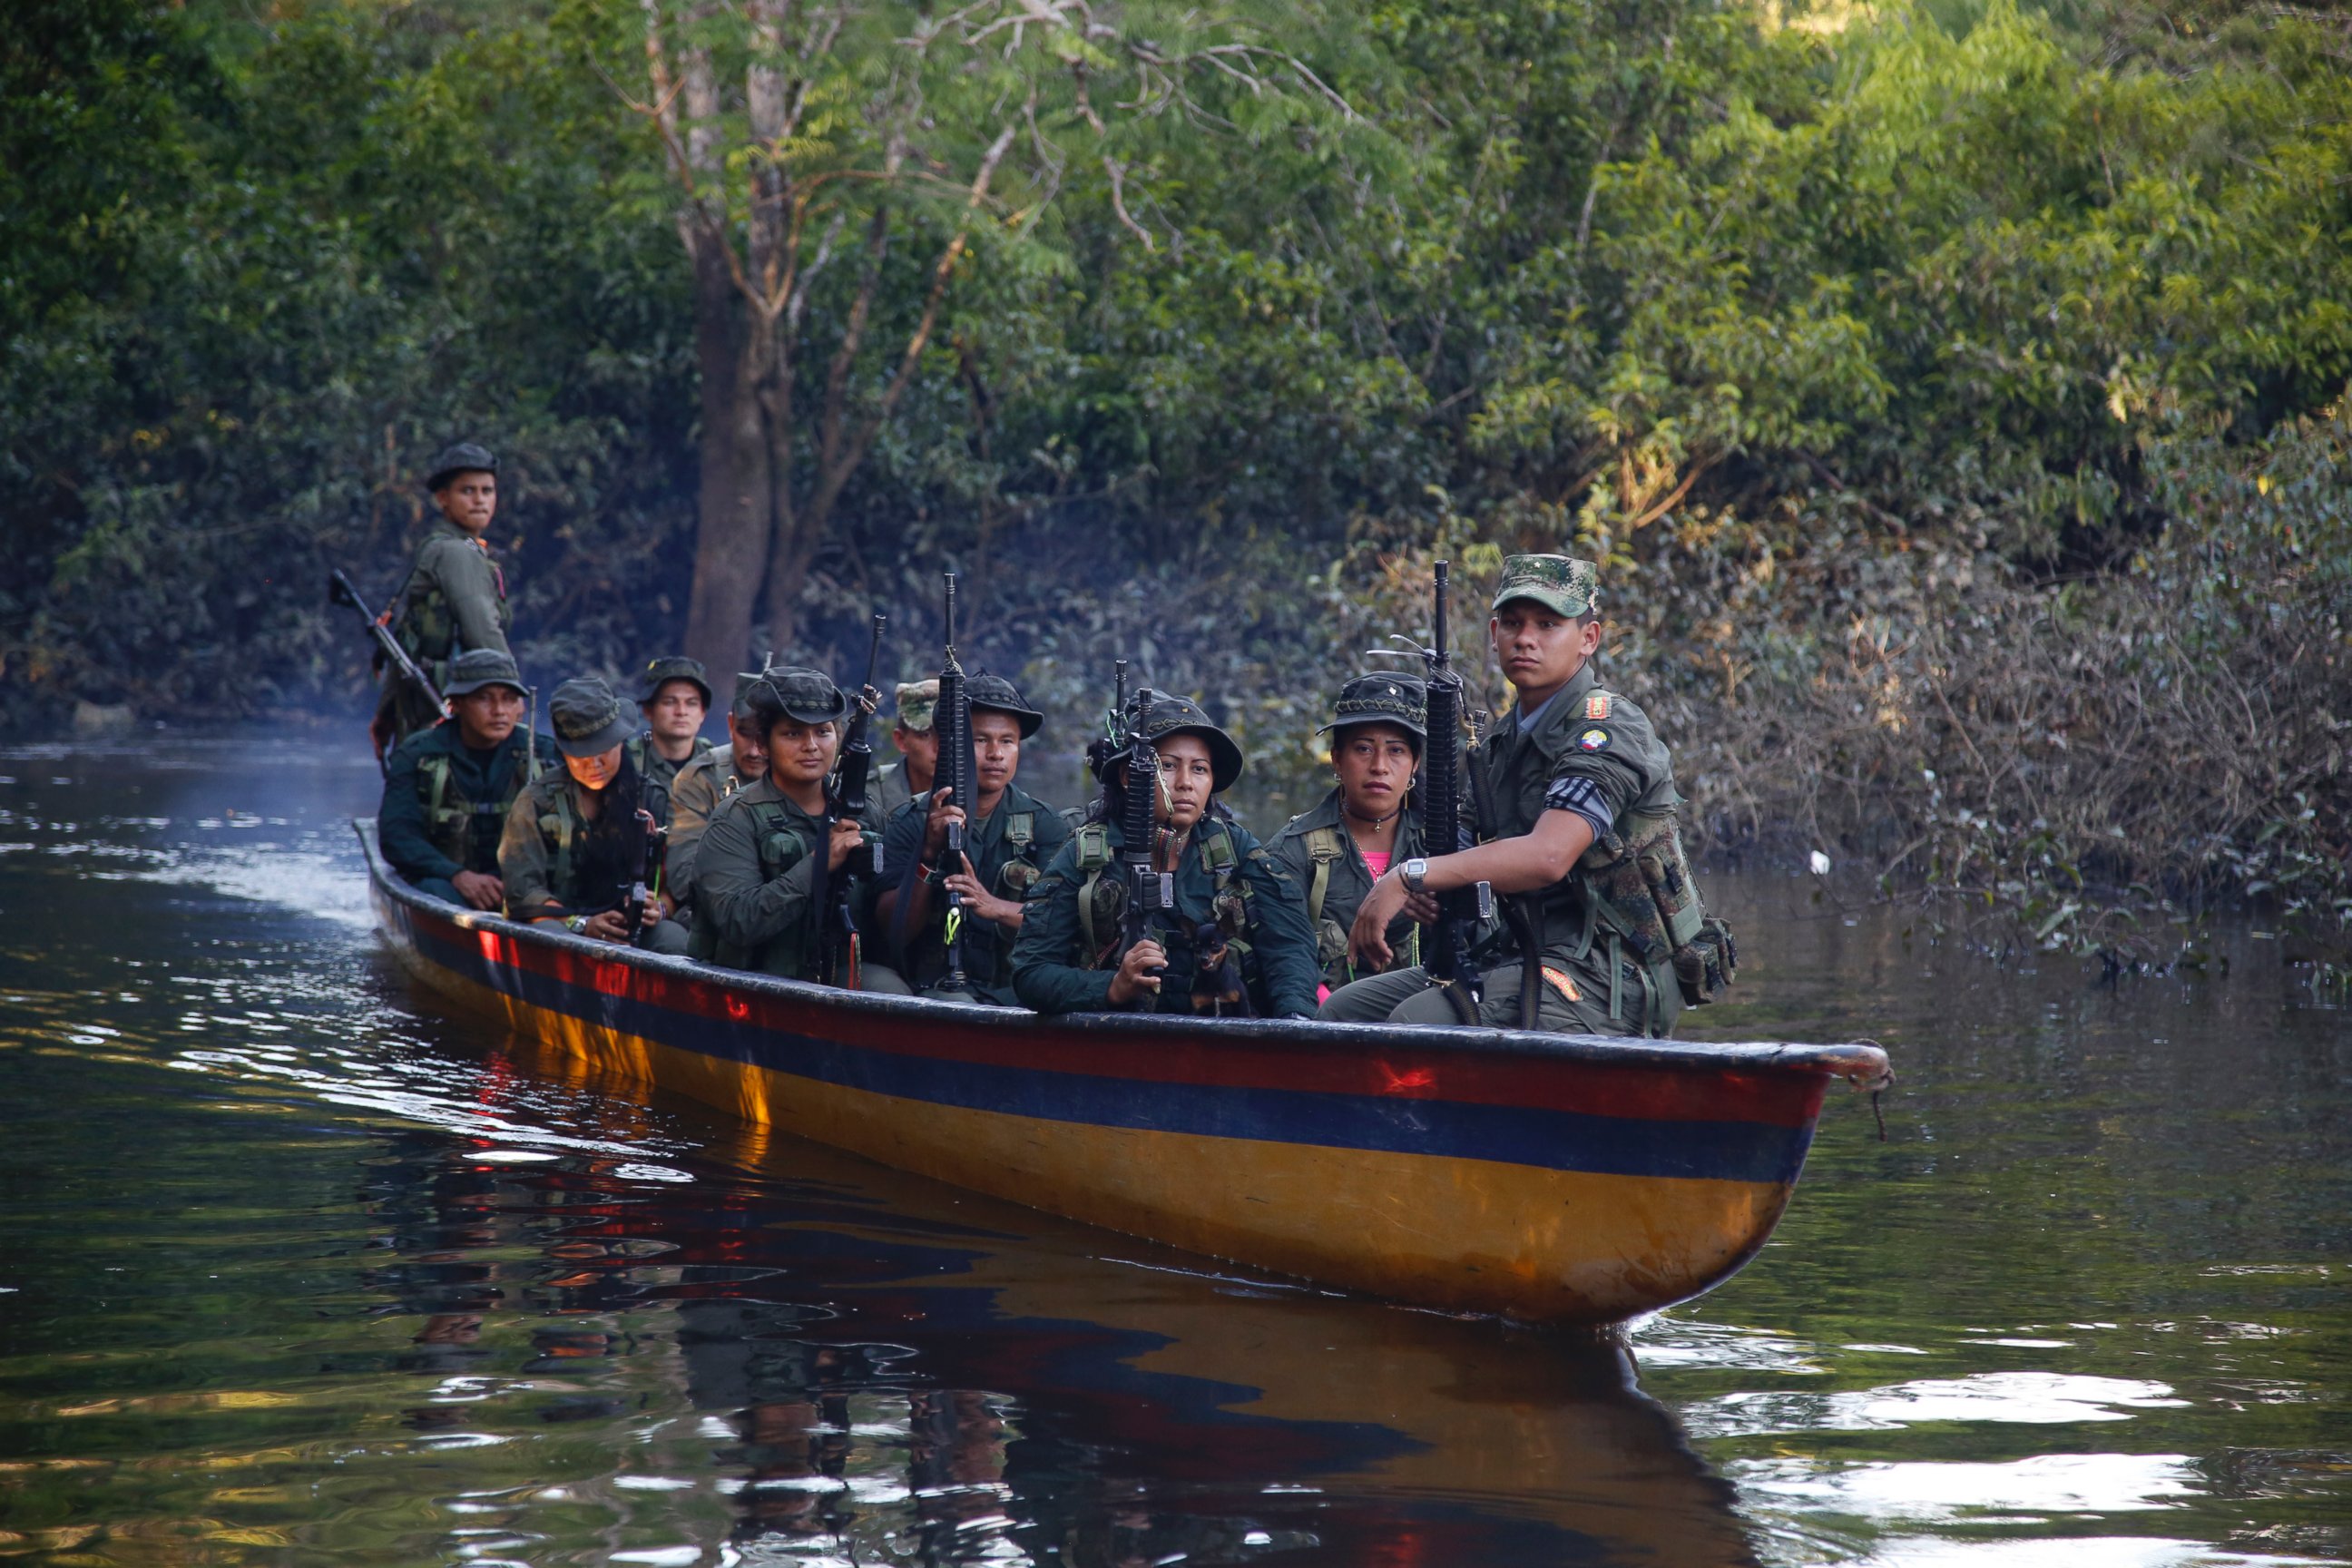 PHOTO: FARC rebels of the 32nd Front of the Revolutionary Armed Forces of Colombia, or FARC, sit in a boat as they patrol the Mecaya river in the southern jungles of Putumayo, Colombia, Aug. 11, 2016.